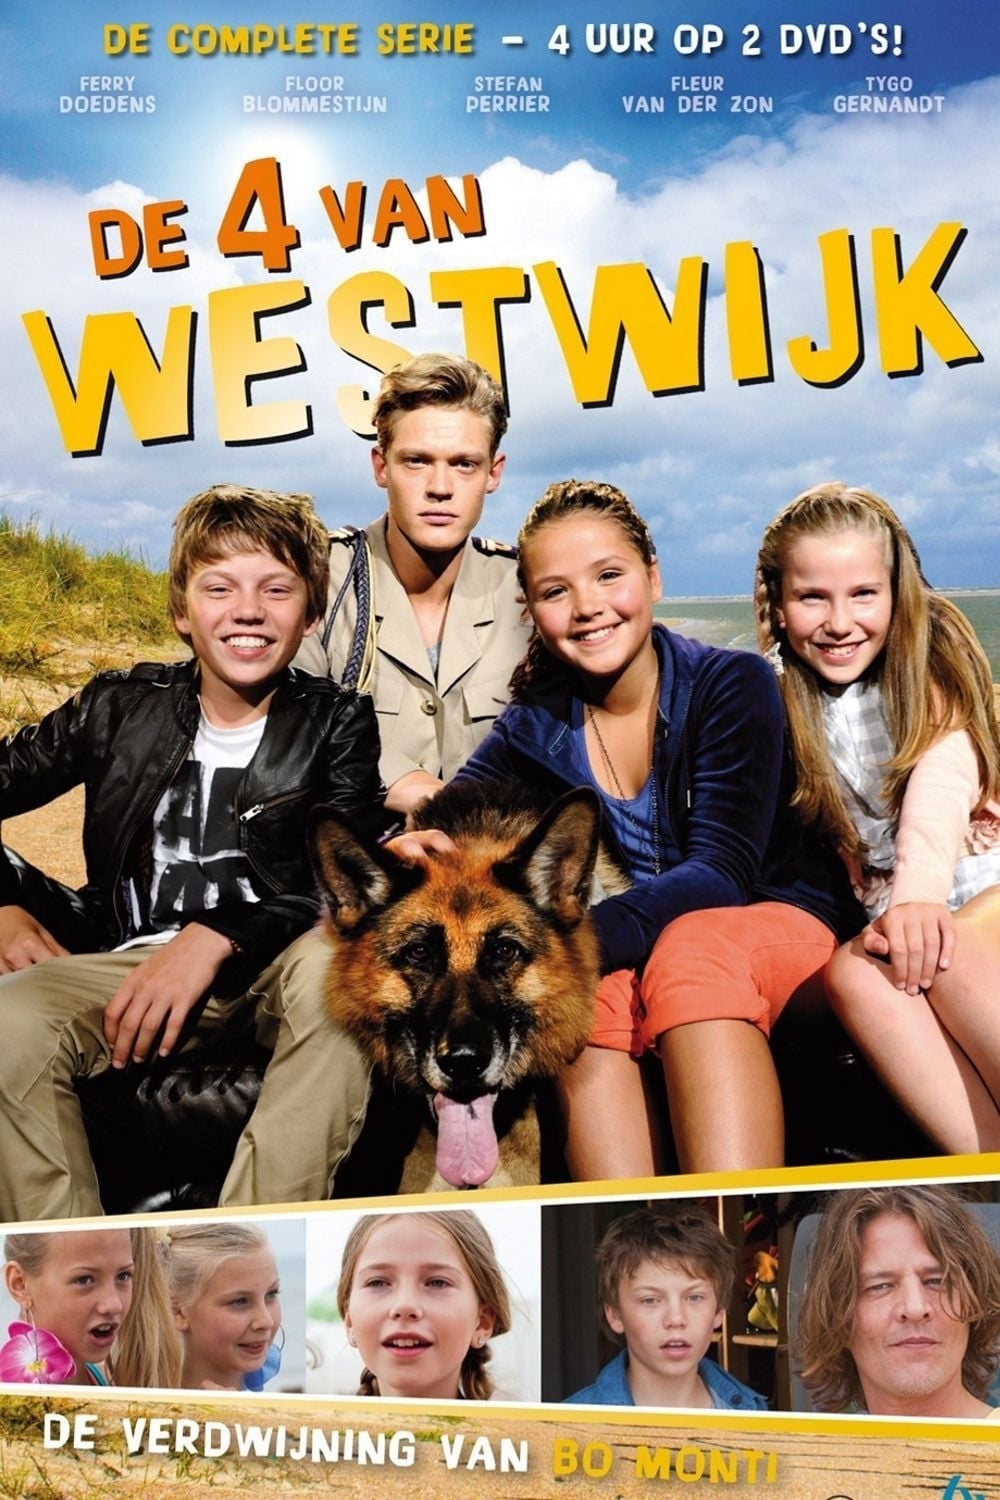 The 4 from Westwijk